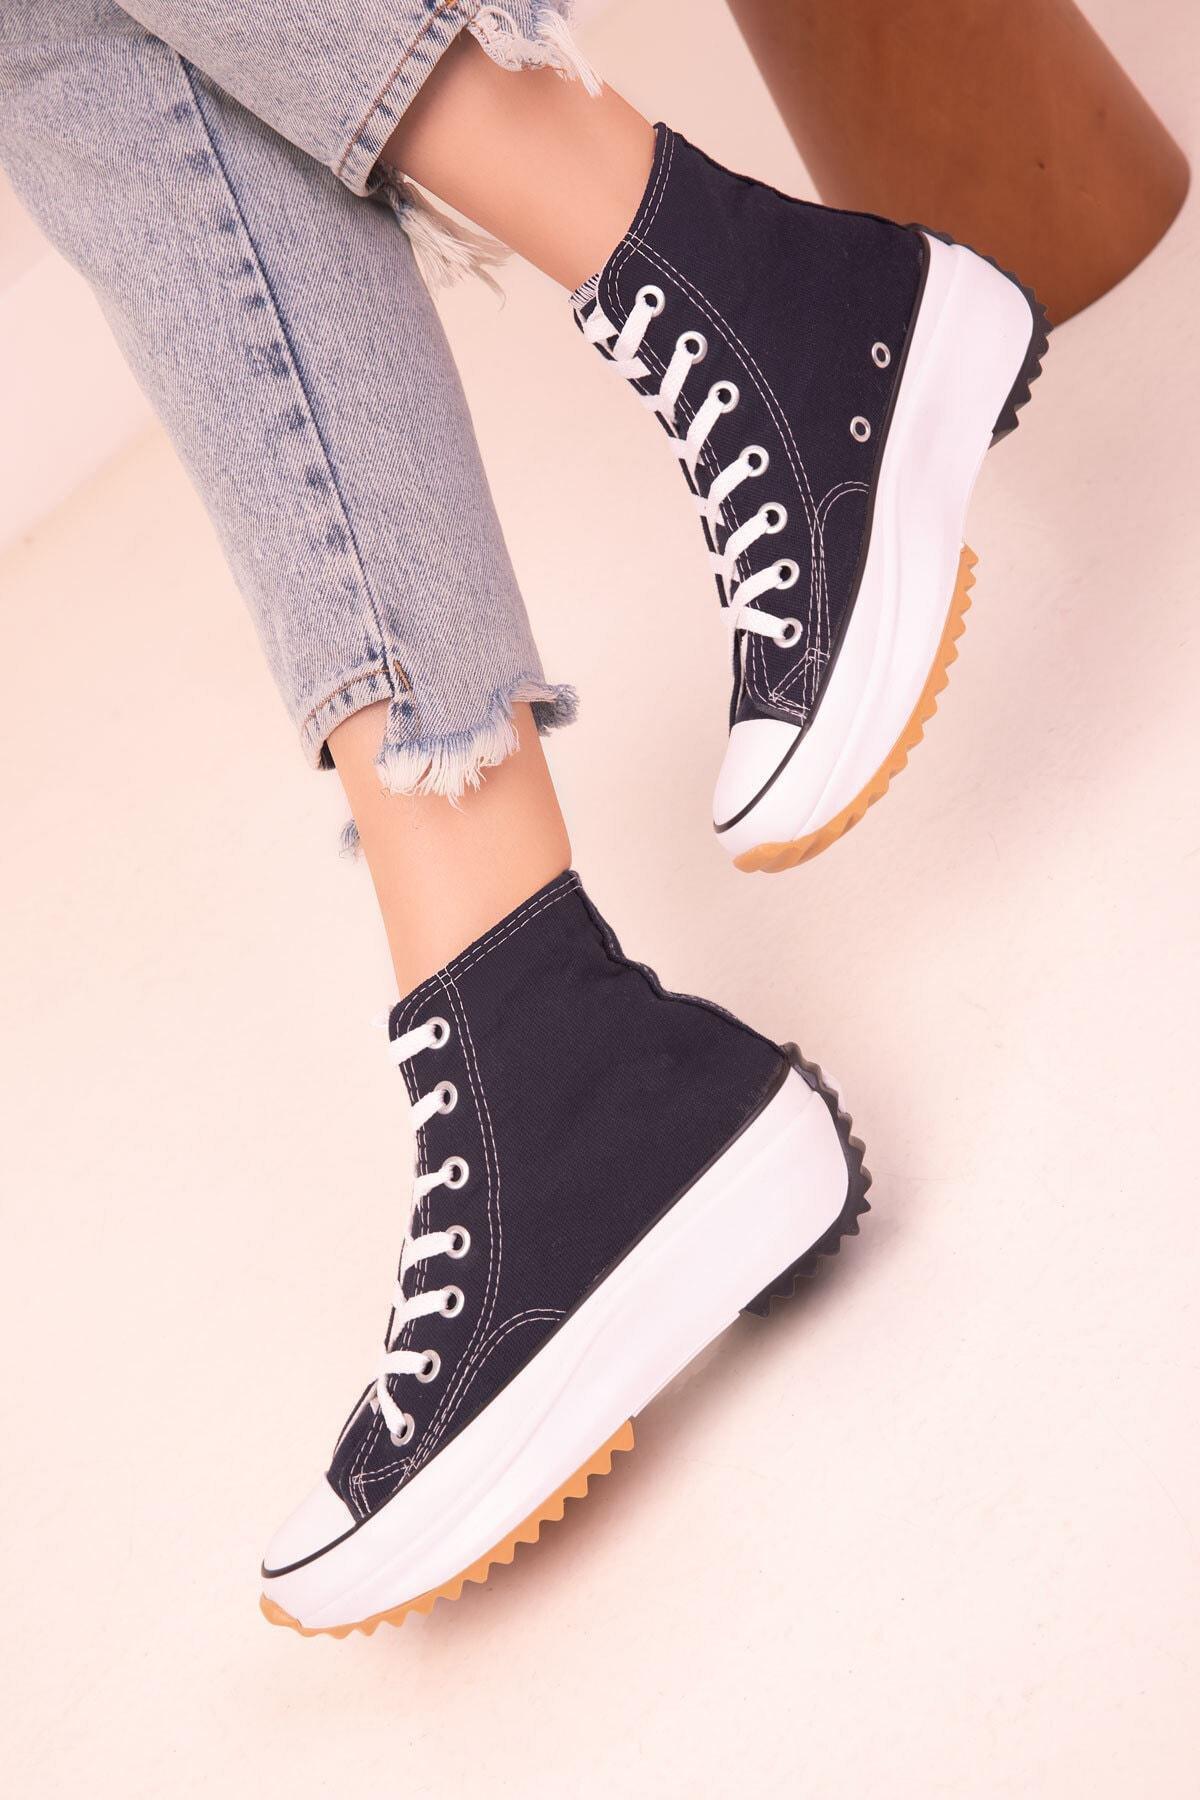 SOHO - Navy Lace Up Sneakers